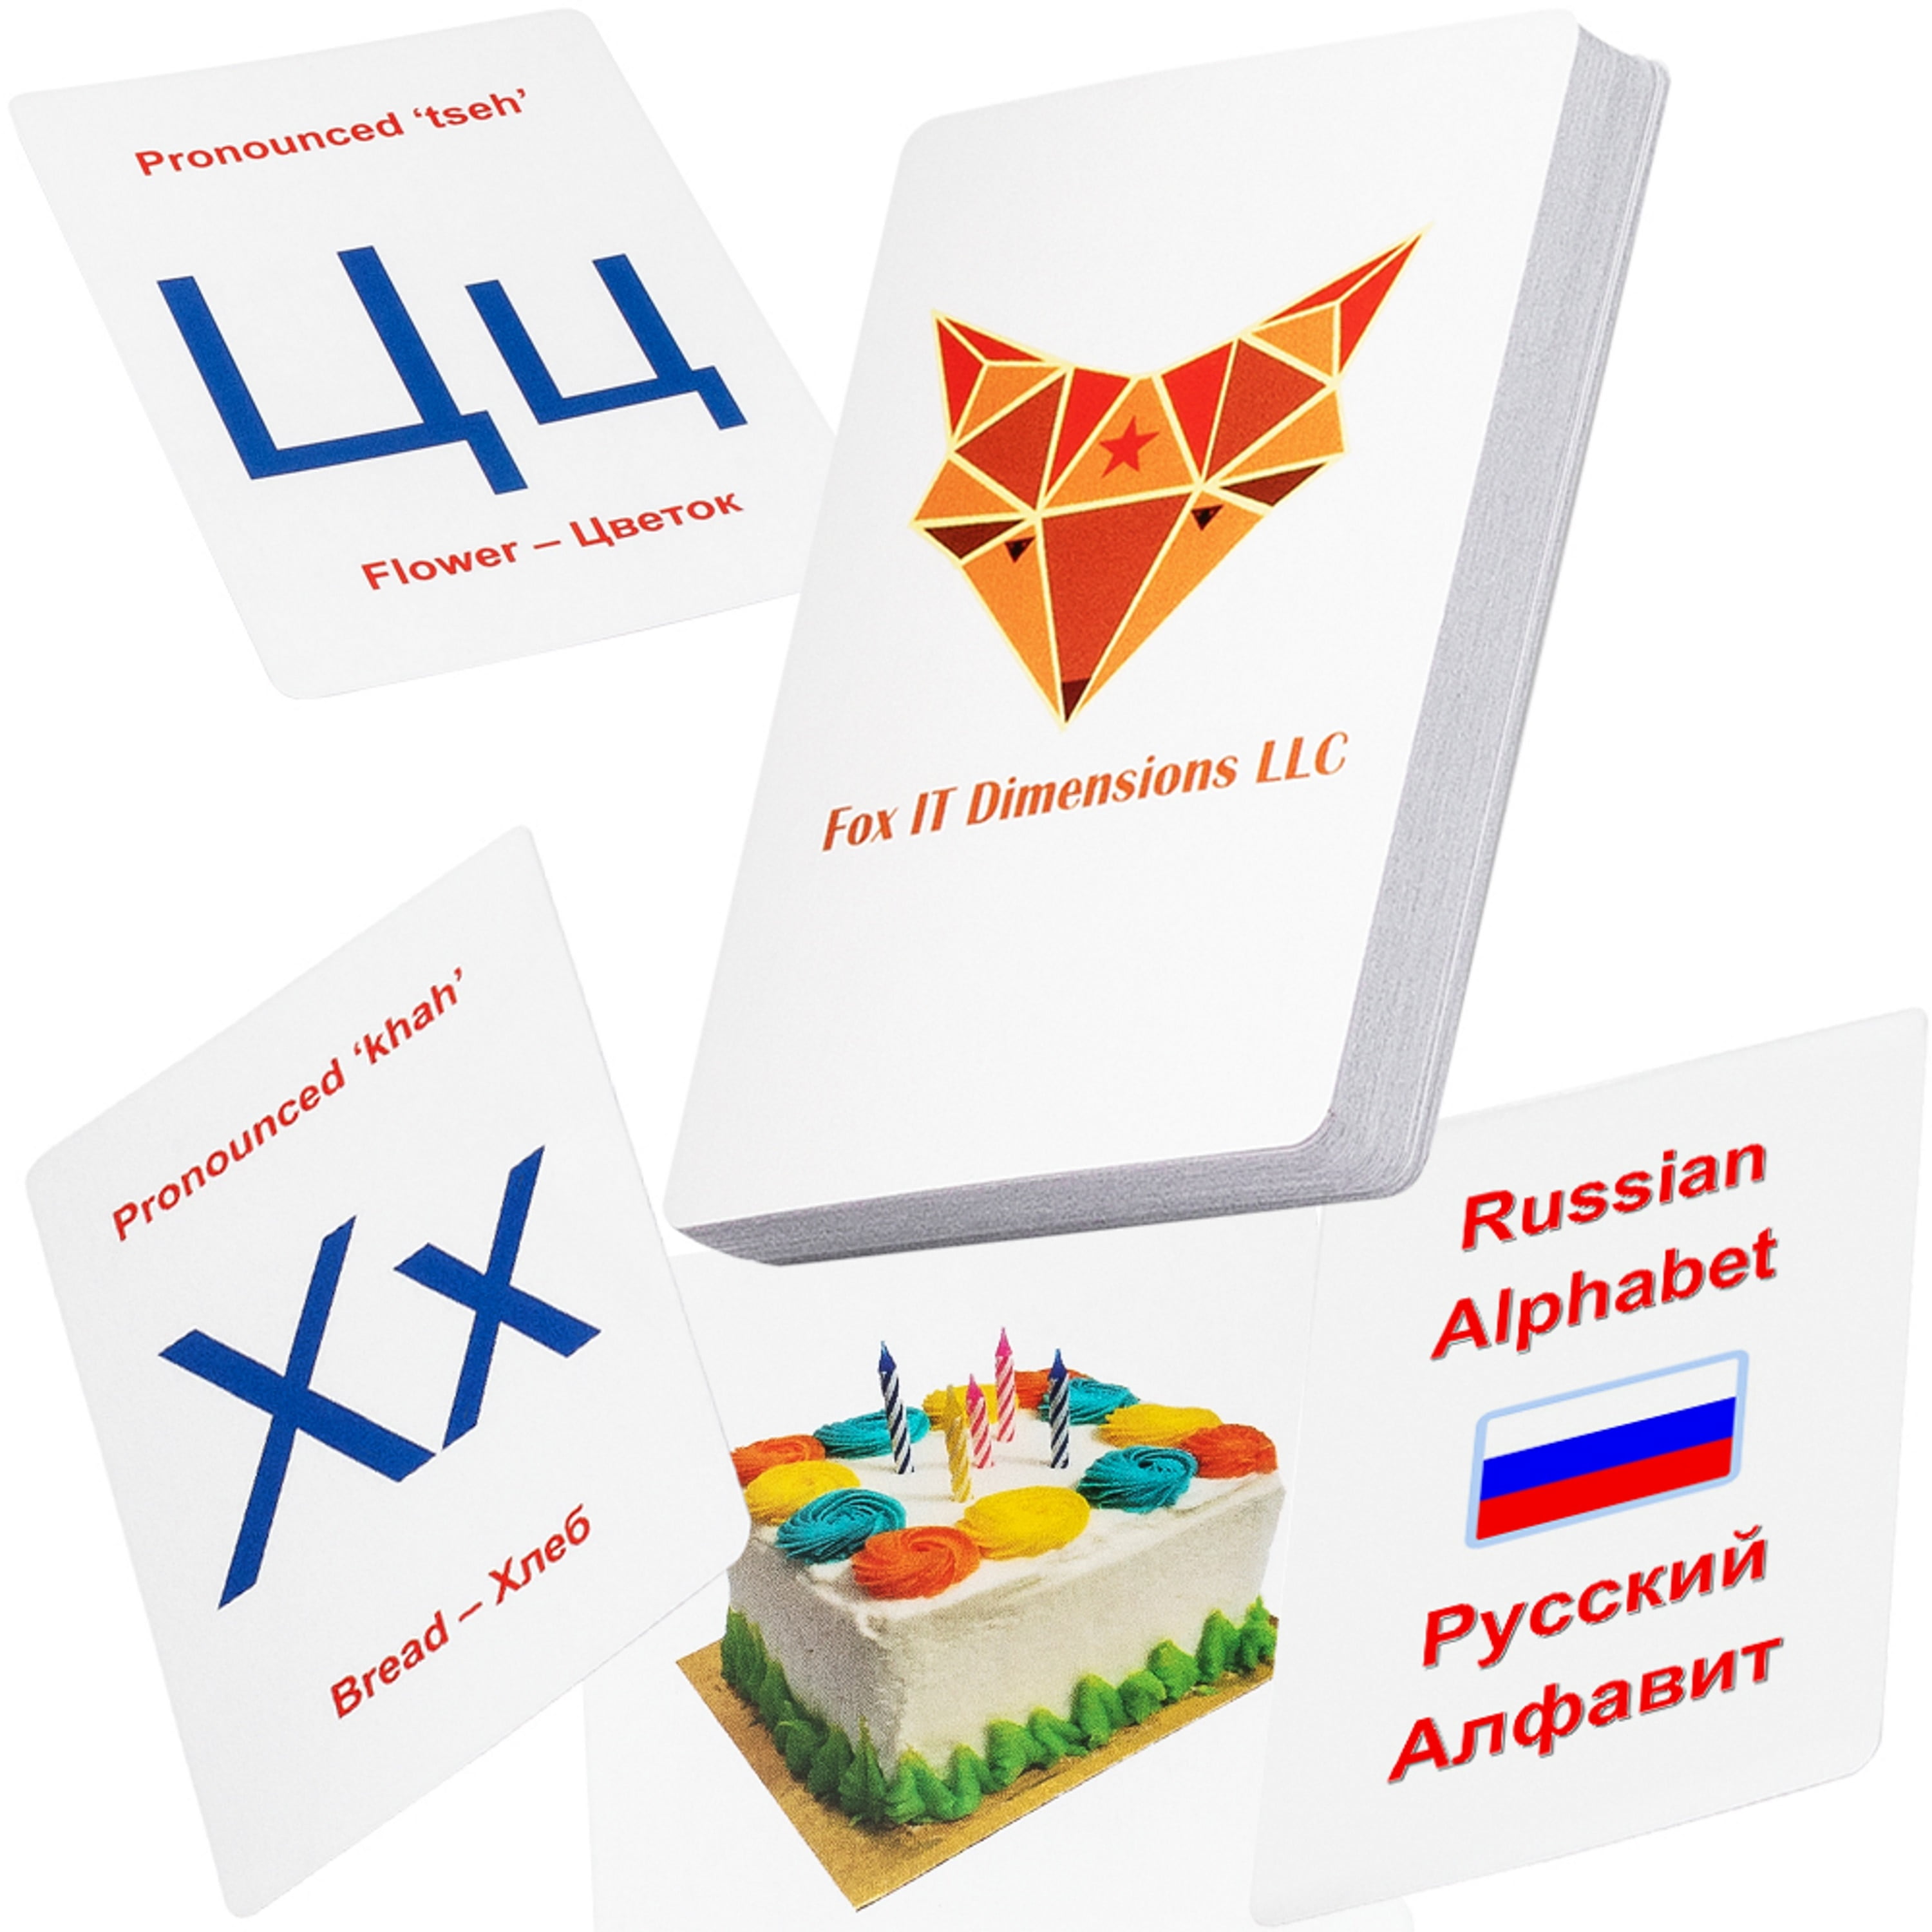 Learn Russian Alphabet for Kids and Adults Through This Professionally Made Russian Alphabet Flash Cards FOXIT Russian Alphabet Learning Flash Cards Students 